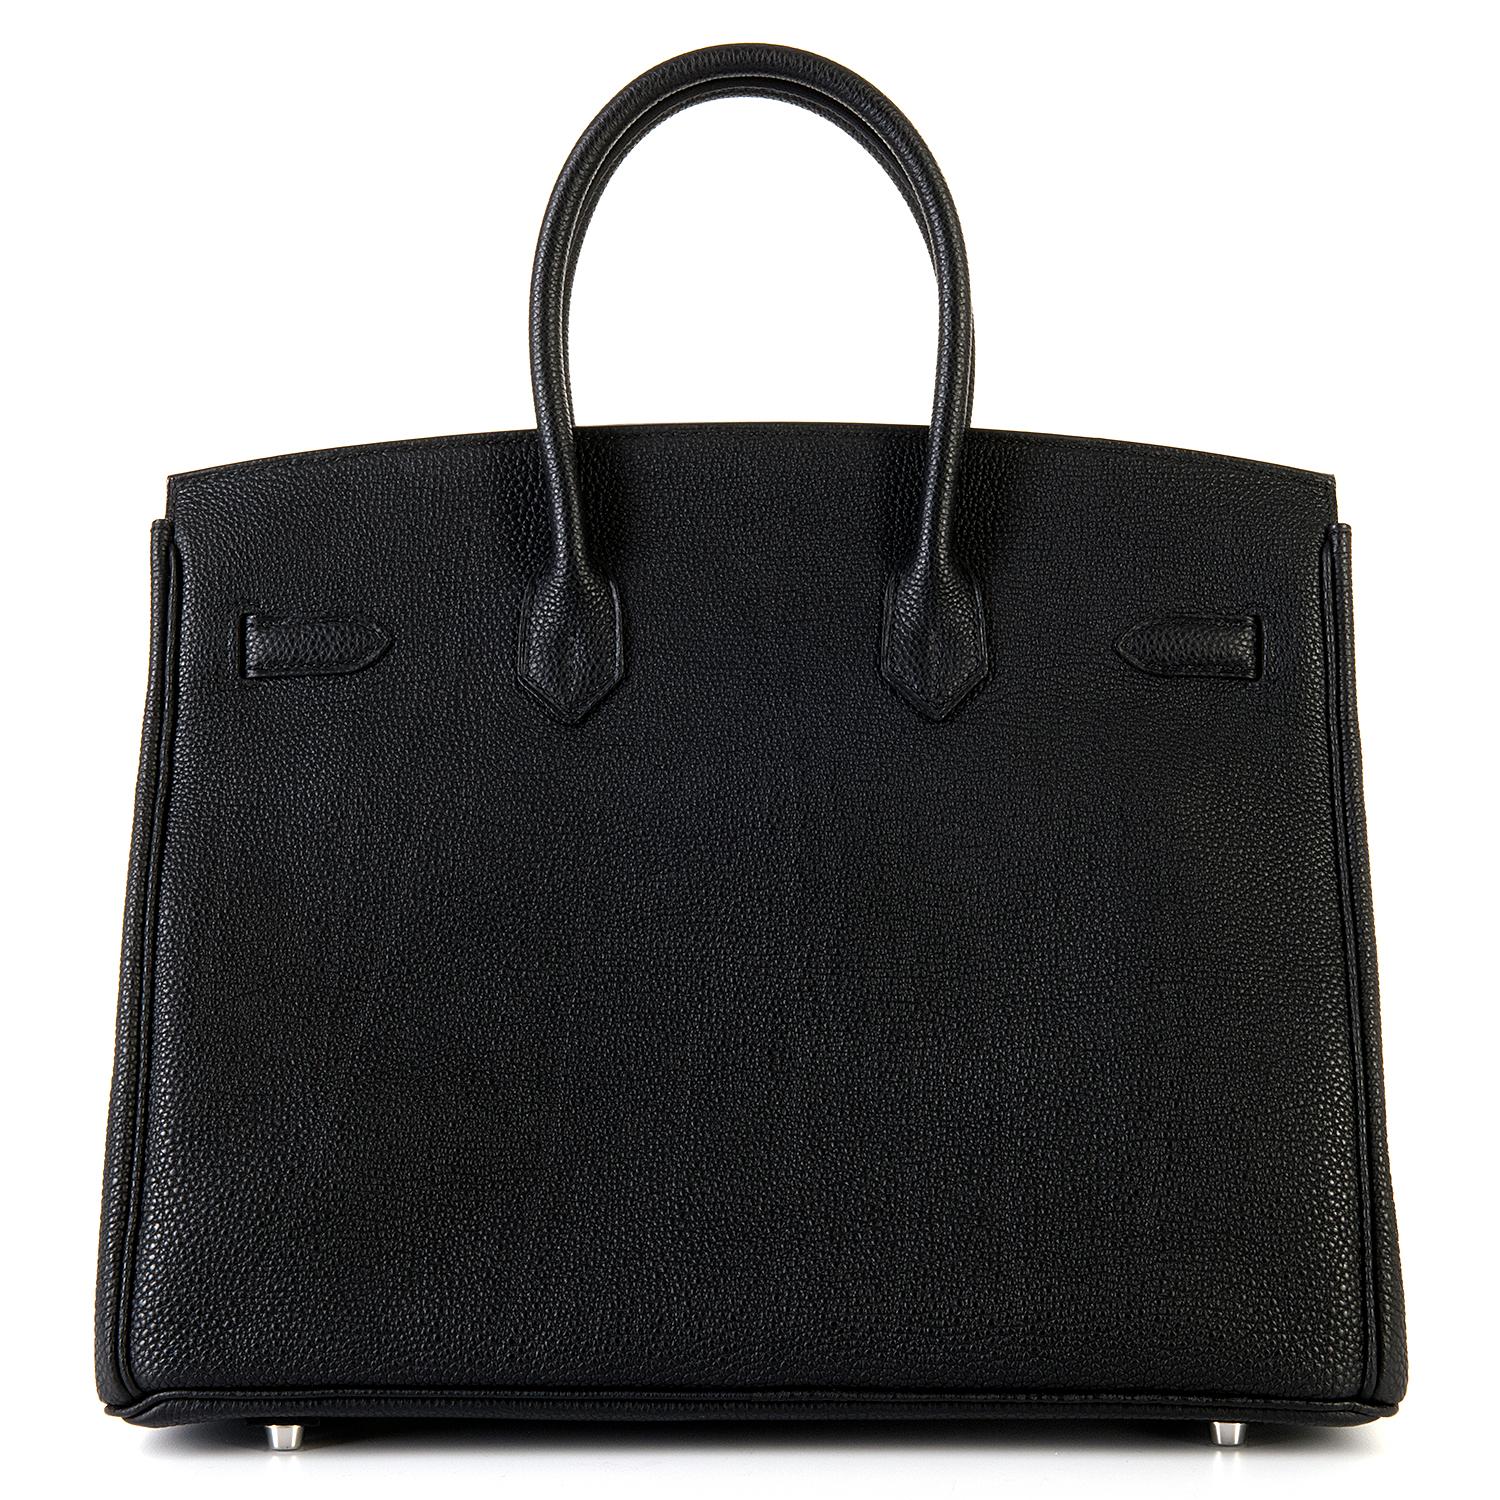 Never worn, this beautiful Black 35cm Birkin bag, finished in rain resistant Fjord leather is accented with Silver Palladium hardware. The bag comes complete with its key-fob, keys, padlock, dust bags, rain cover & it's original Hermes box and